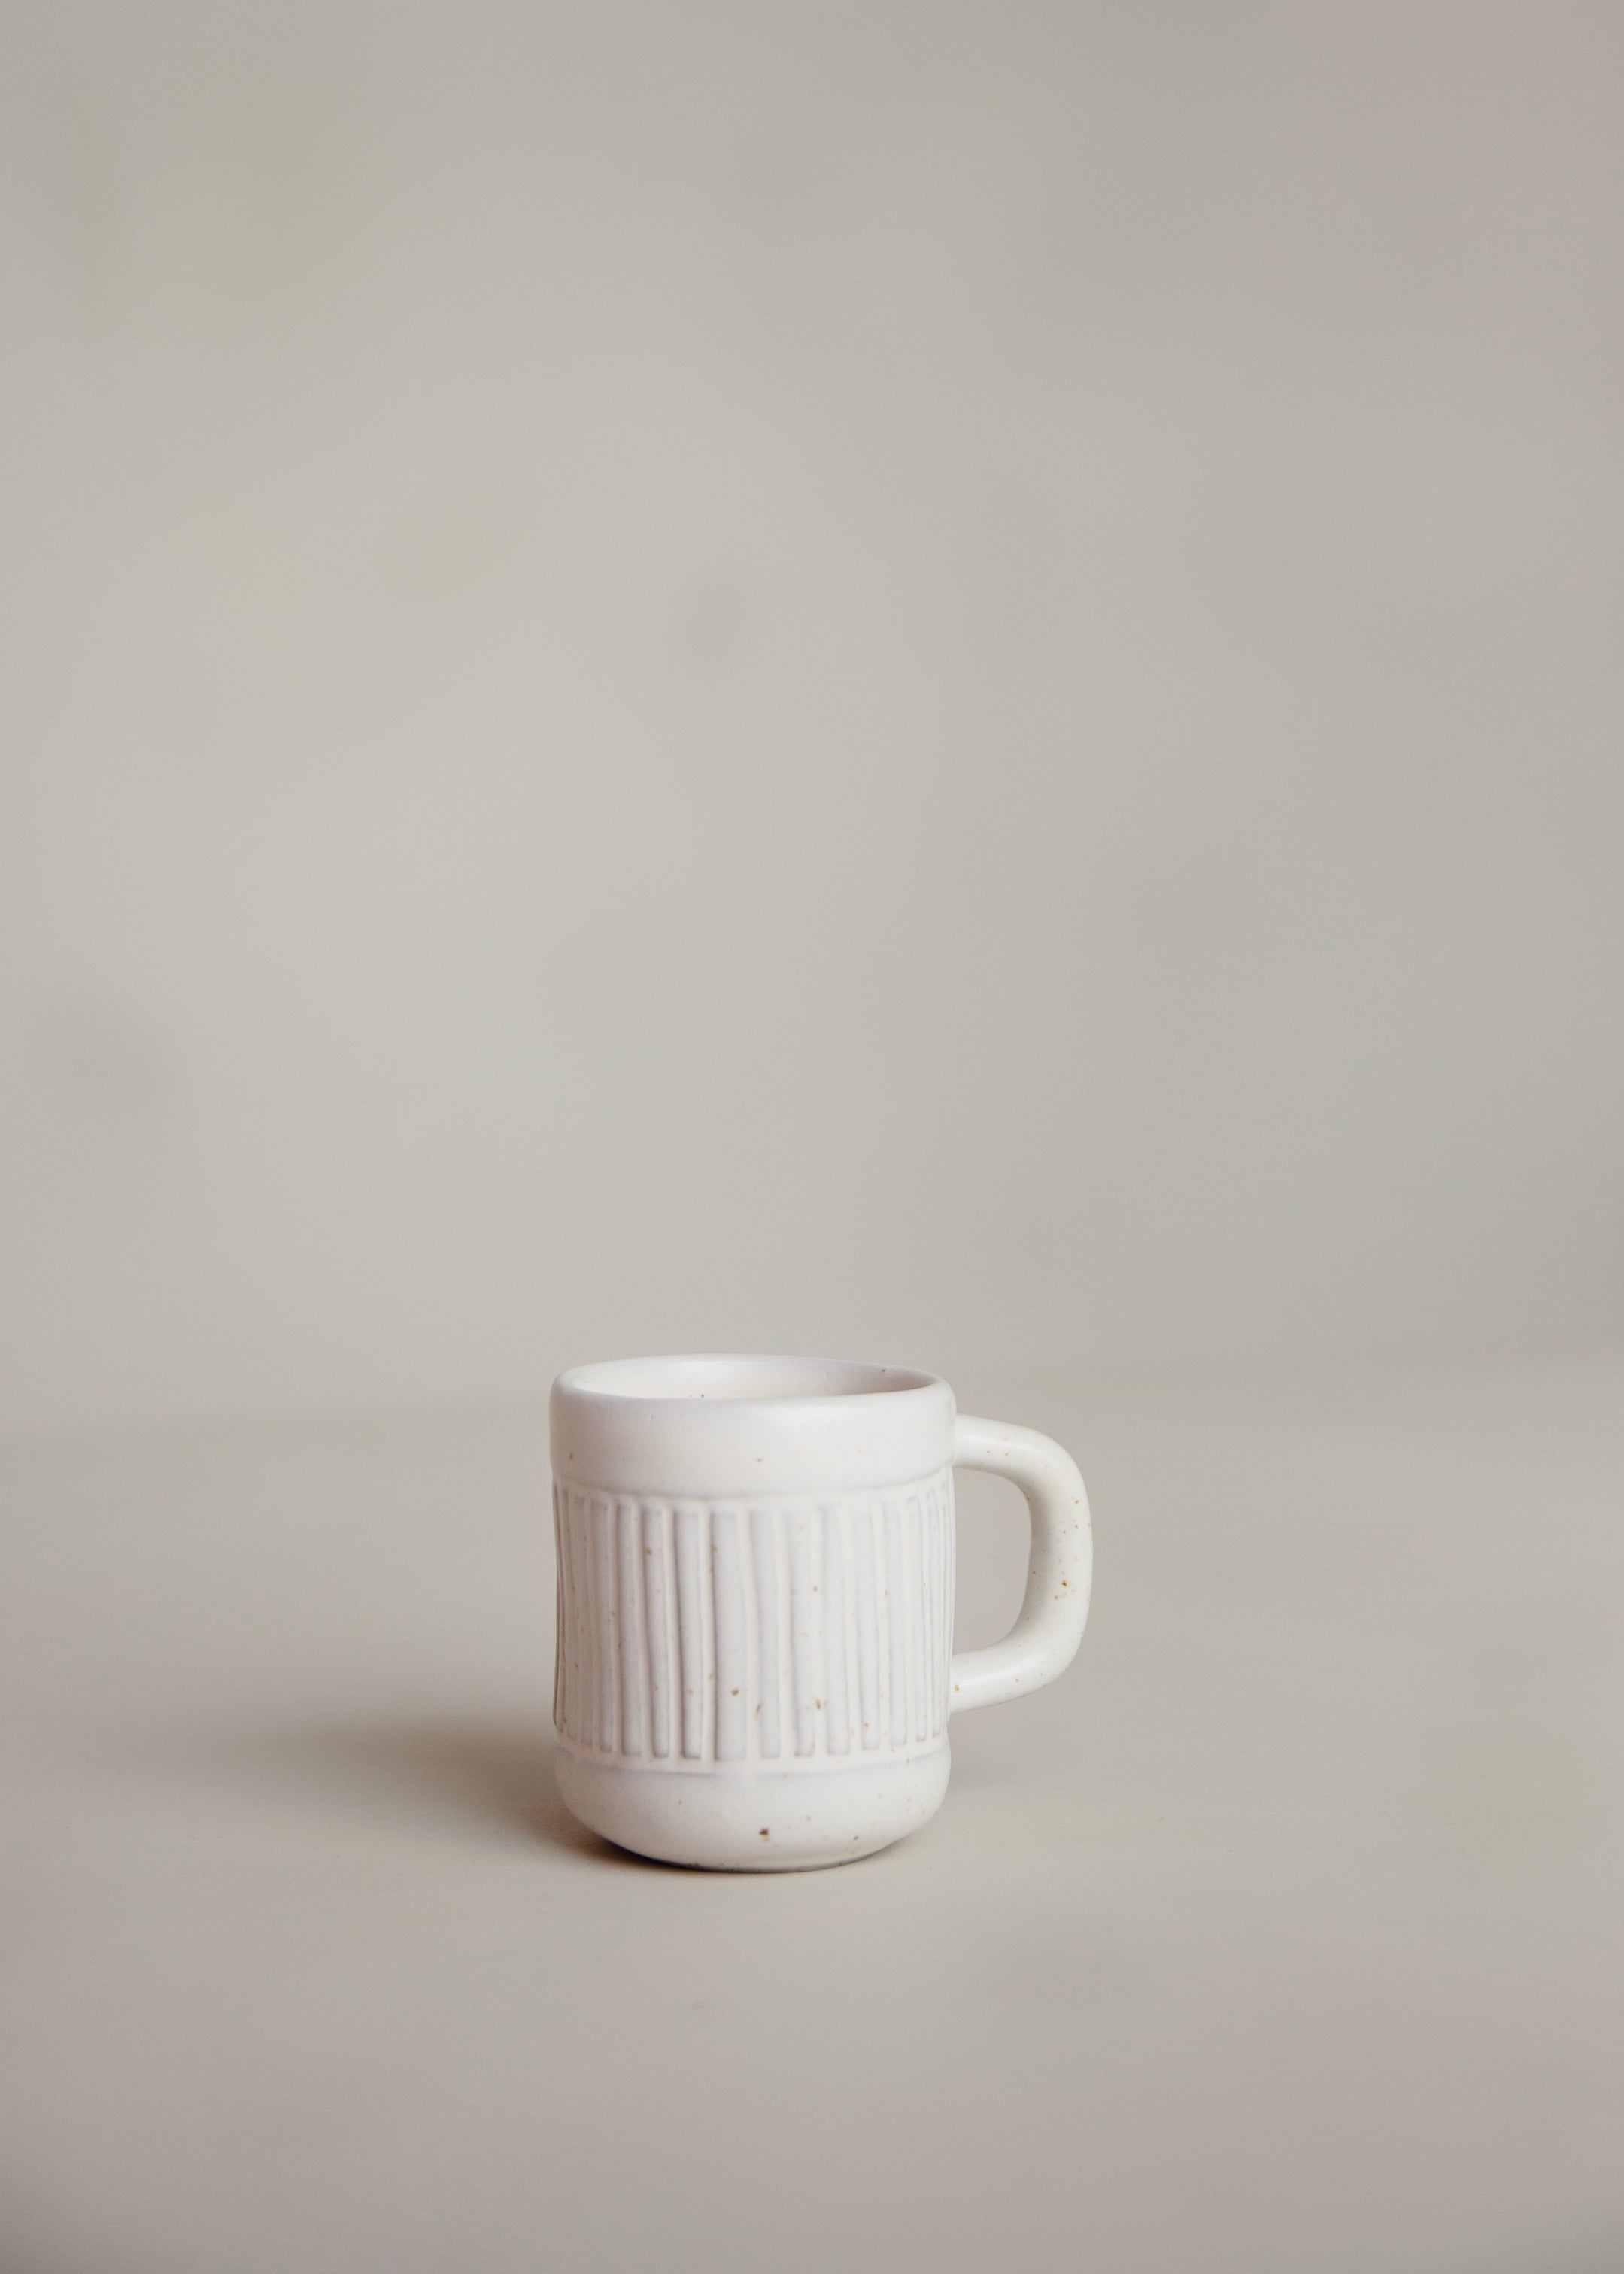 Wono Cup / Speckled White